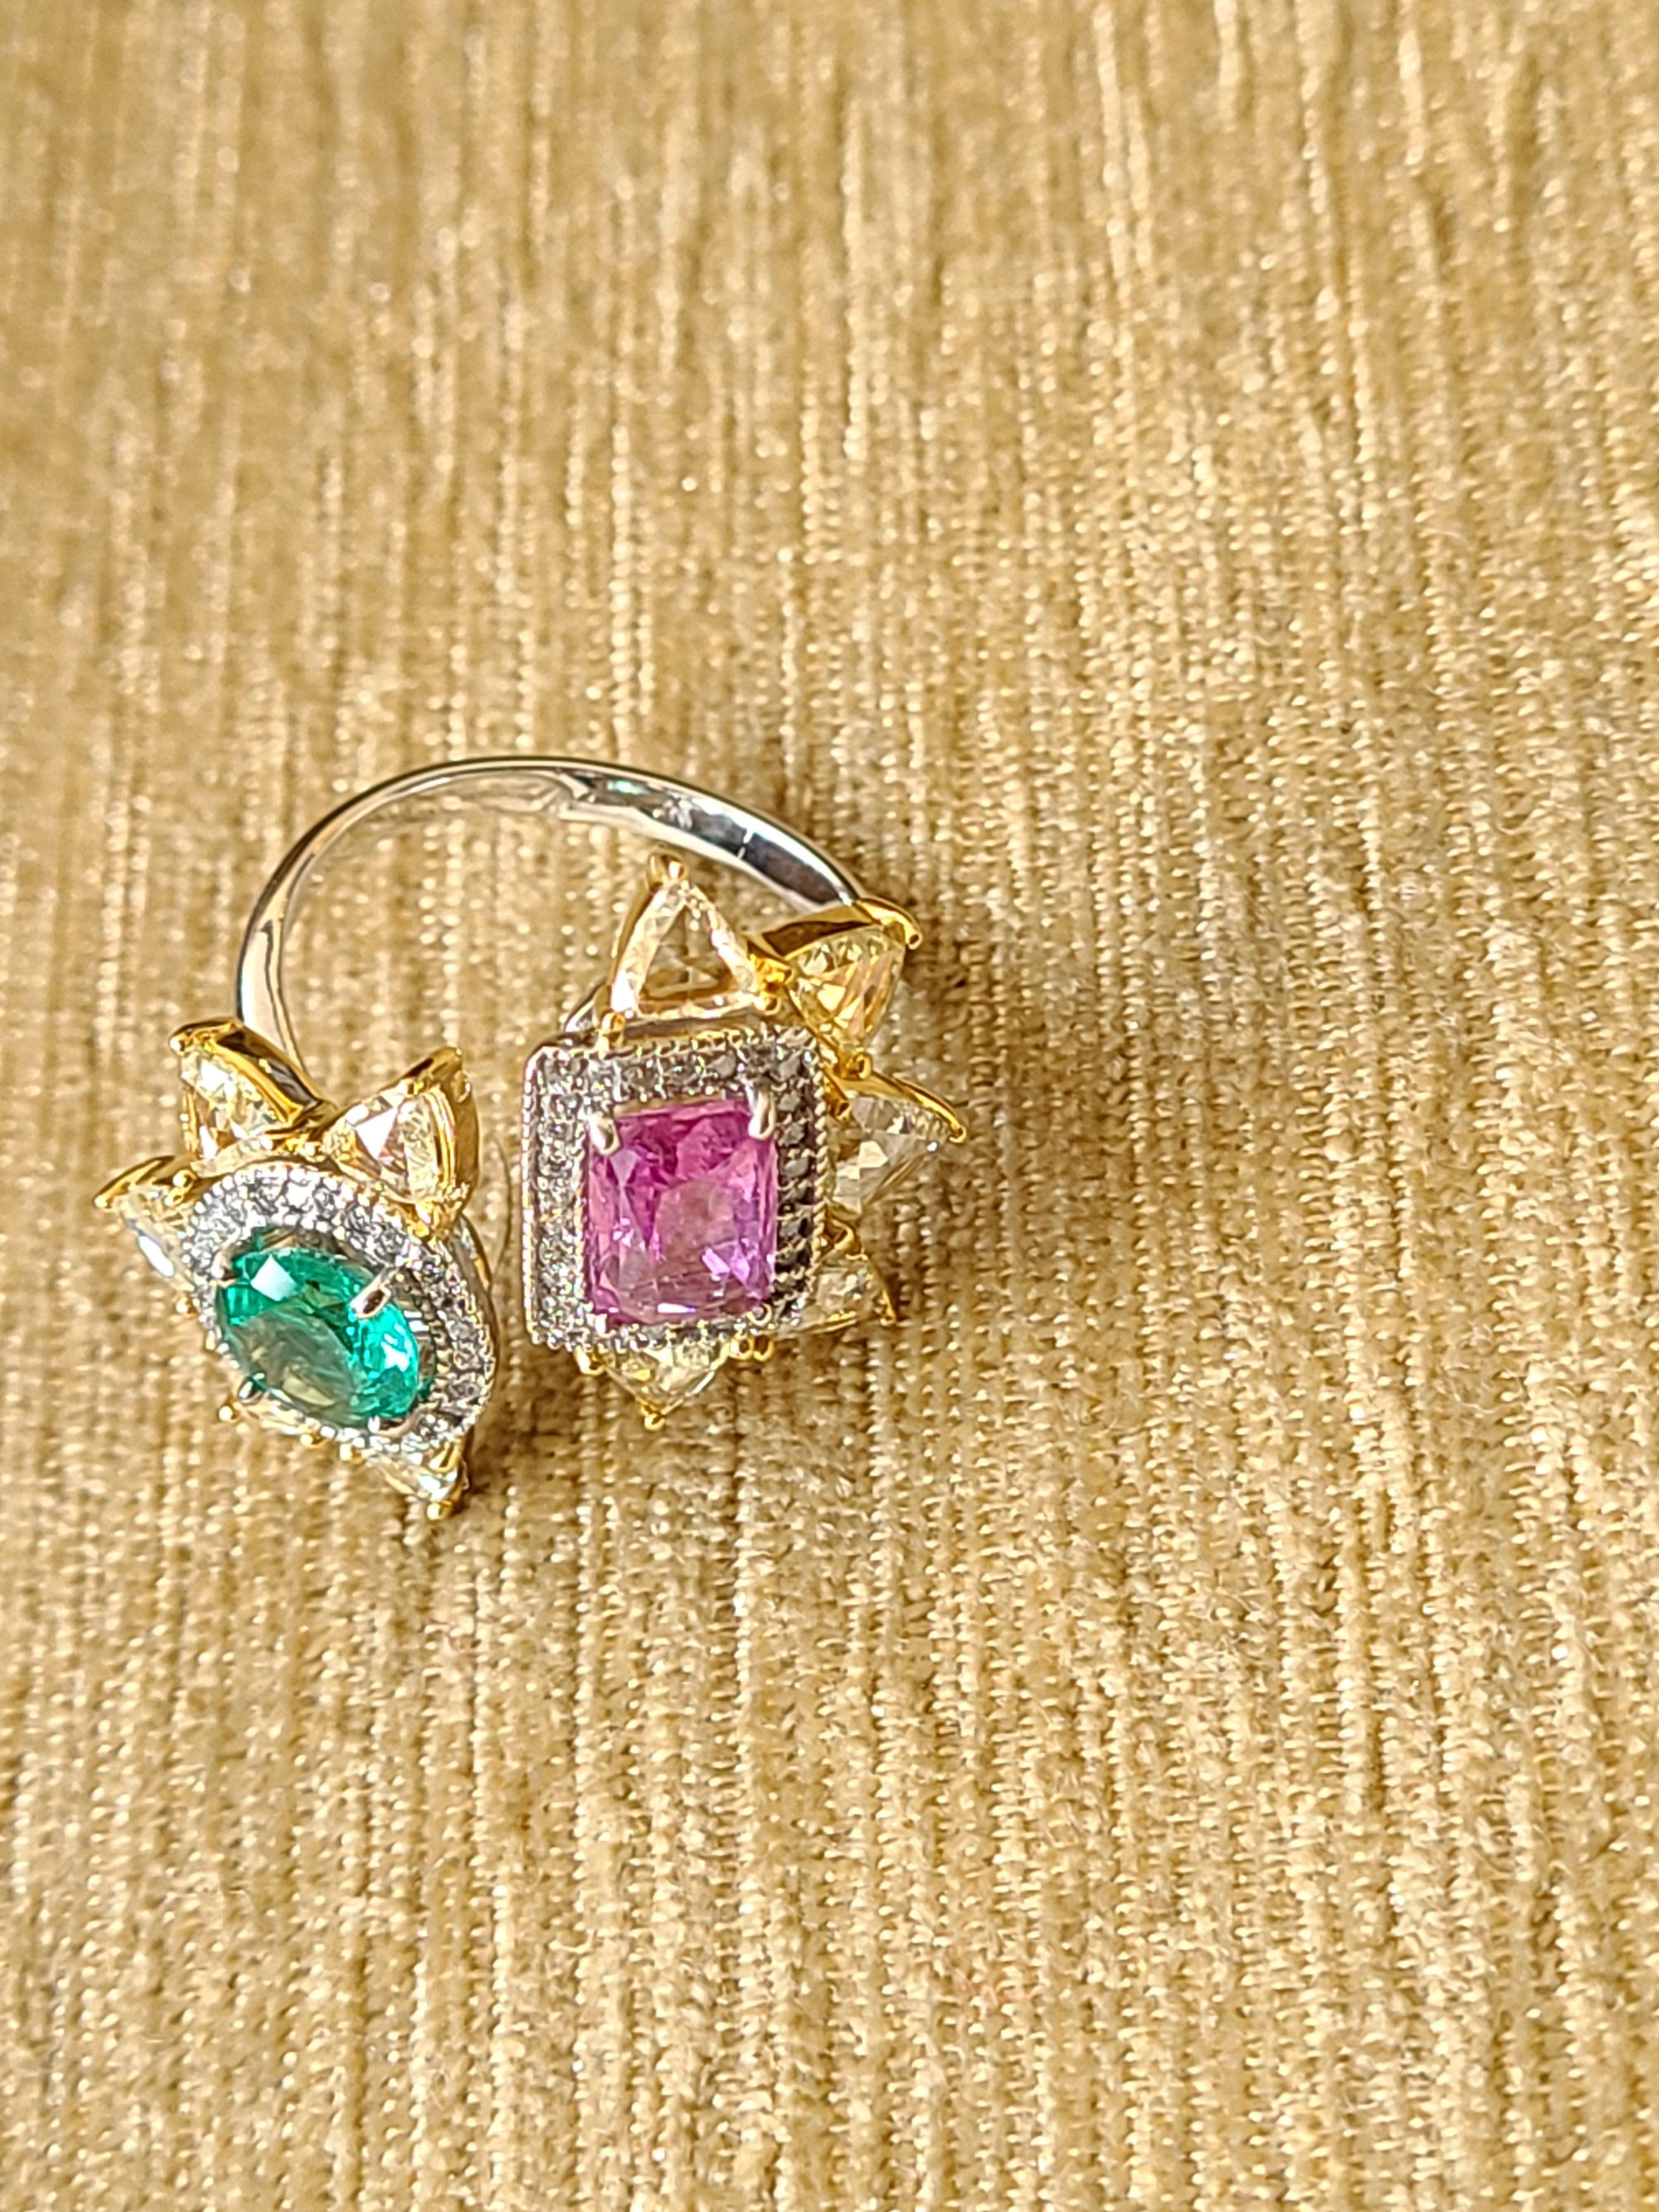 A gorgeous and chic emerald and pink sapphire ring set in 18k white and yellow gold with rose-cut diamond. The emerald weight is .86 carats and pink sapphire weight is 1.54 carats, the diamond combined weight is 1.78 carats. The net gold weight is